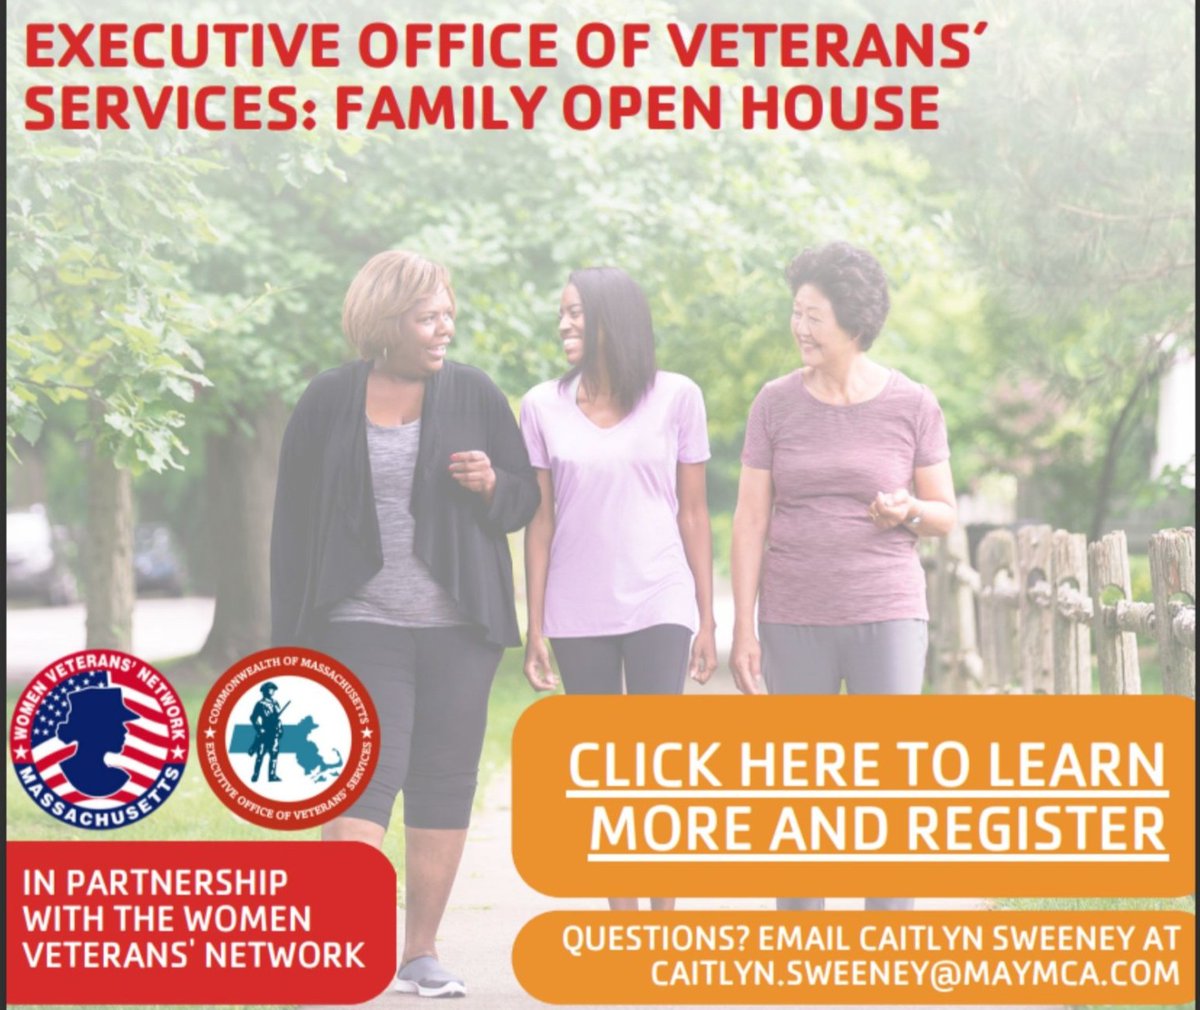 Waiting to hear what's next for the WVN? Our WVN is partnering with the YMCA to provide an open house weekend for women #veterans & their families! Find a participating Y near you & register today ⤵️ 💻ow.ly/af3r50Nvkct